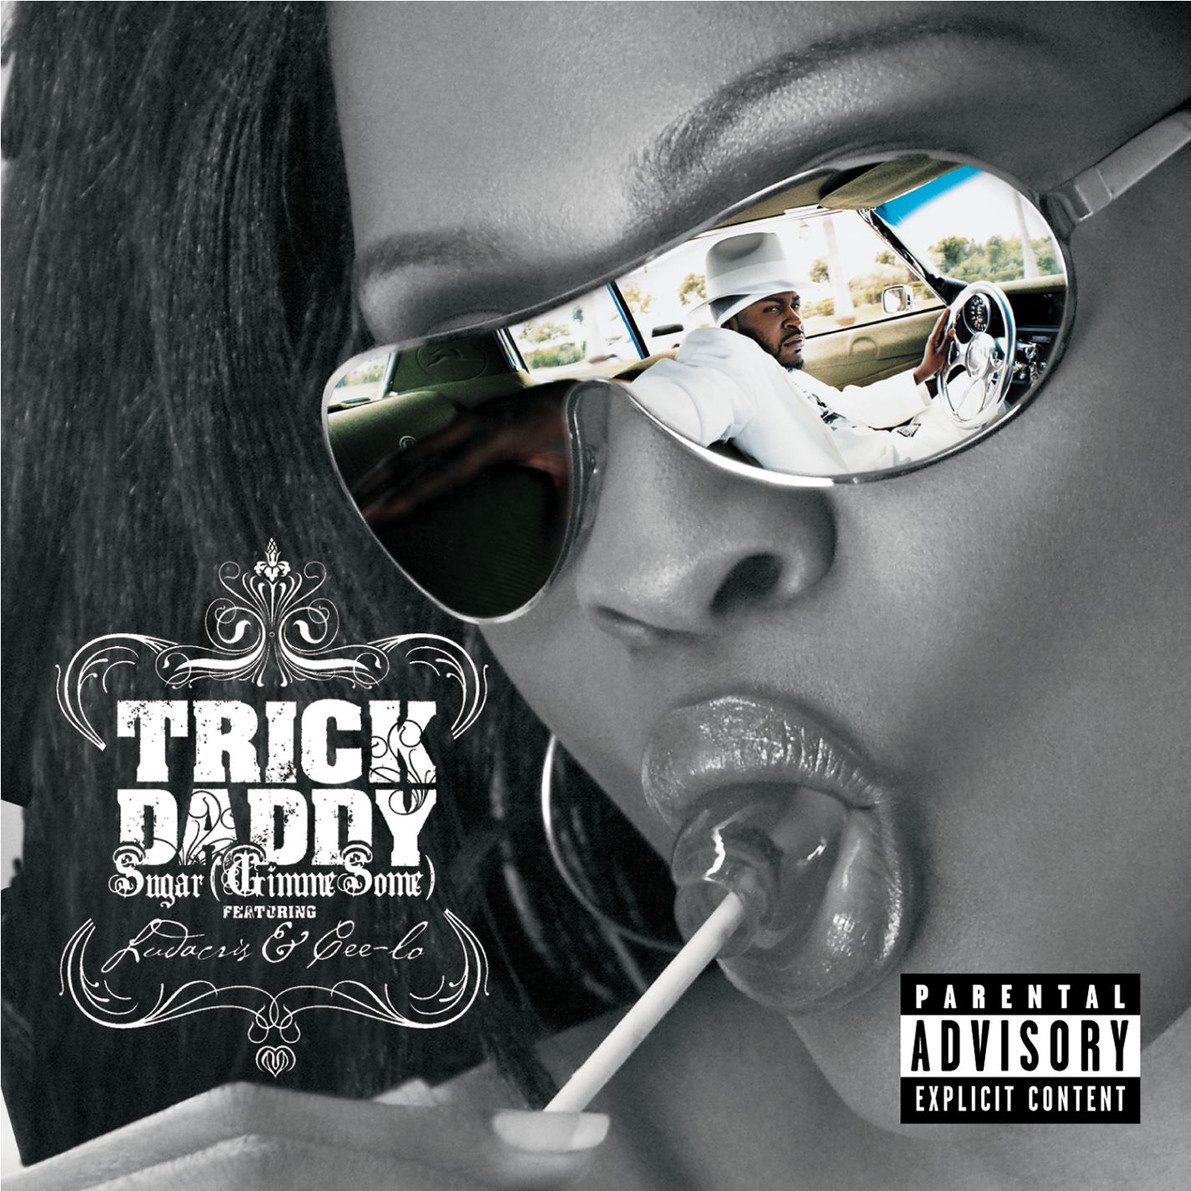 Sugar (Gimme Some) (featuring Ludacris, Lil Kim, and Cee-Lo) (Main)